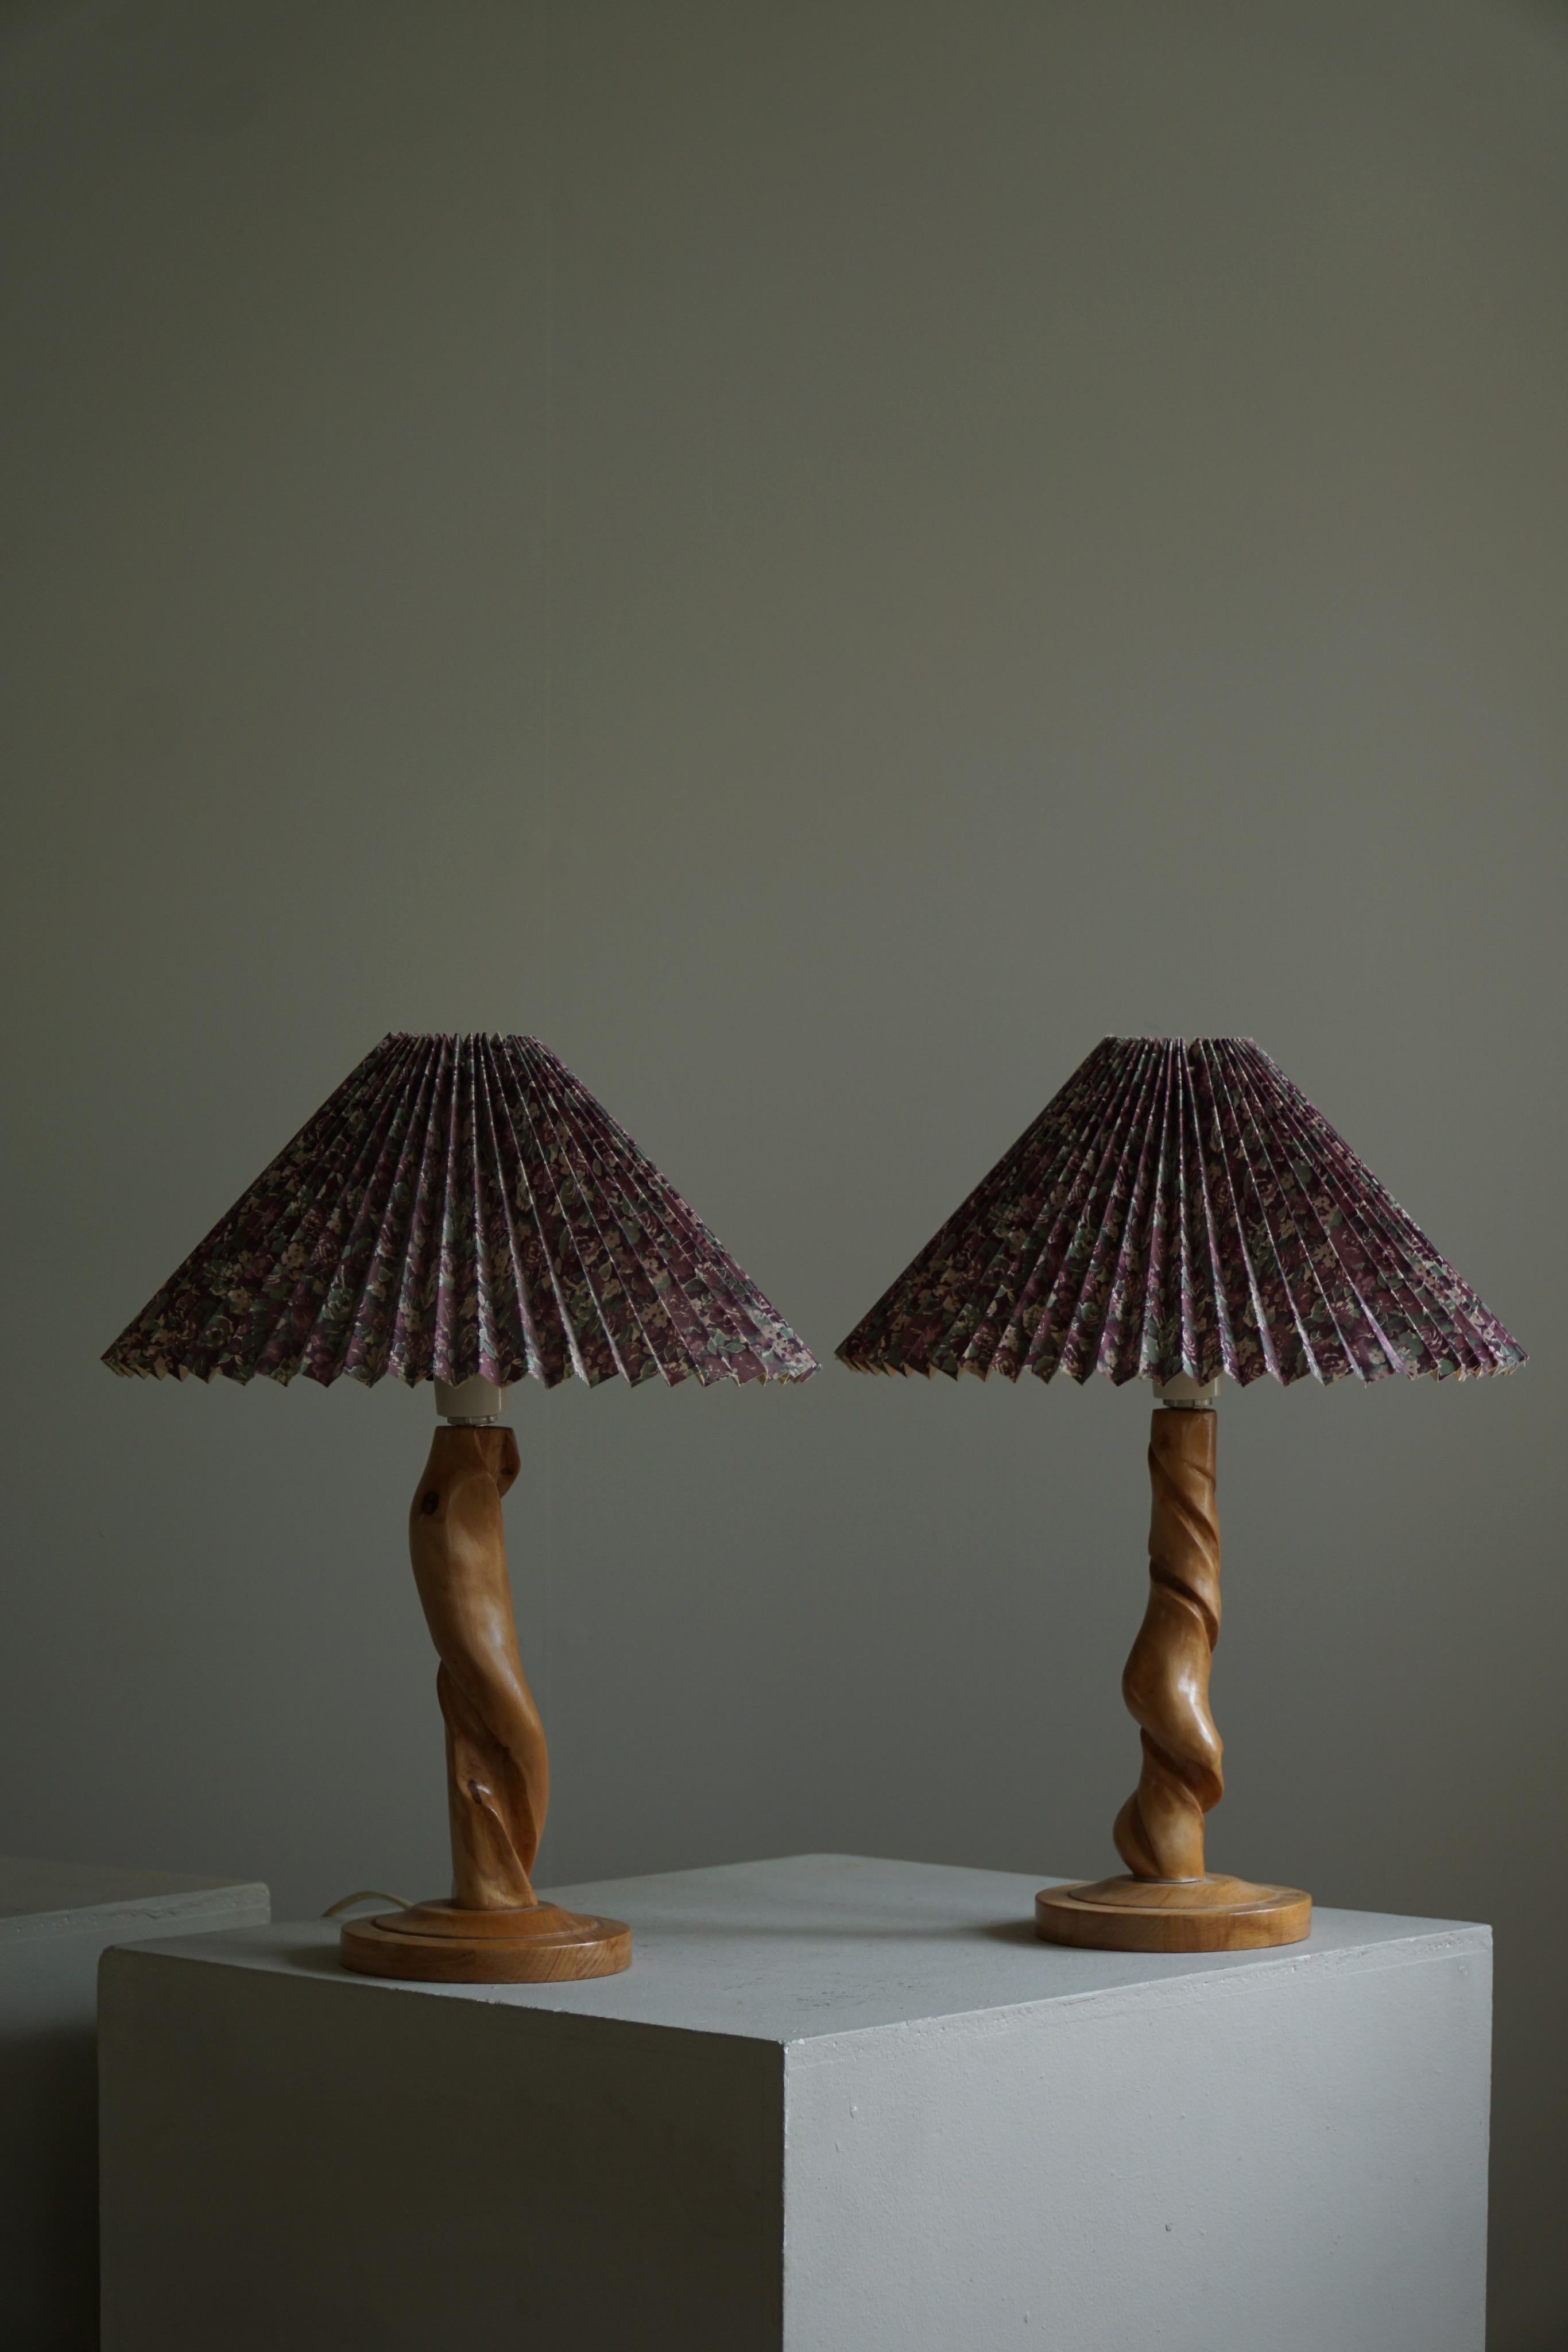 Pair of Sculptural Organic Wooden Table Lamps, Scandinavian Modern, 1970s In Good Condition For Sale In Odense, DK